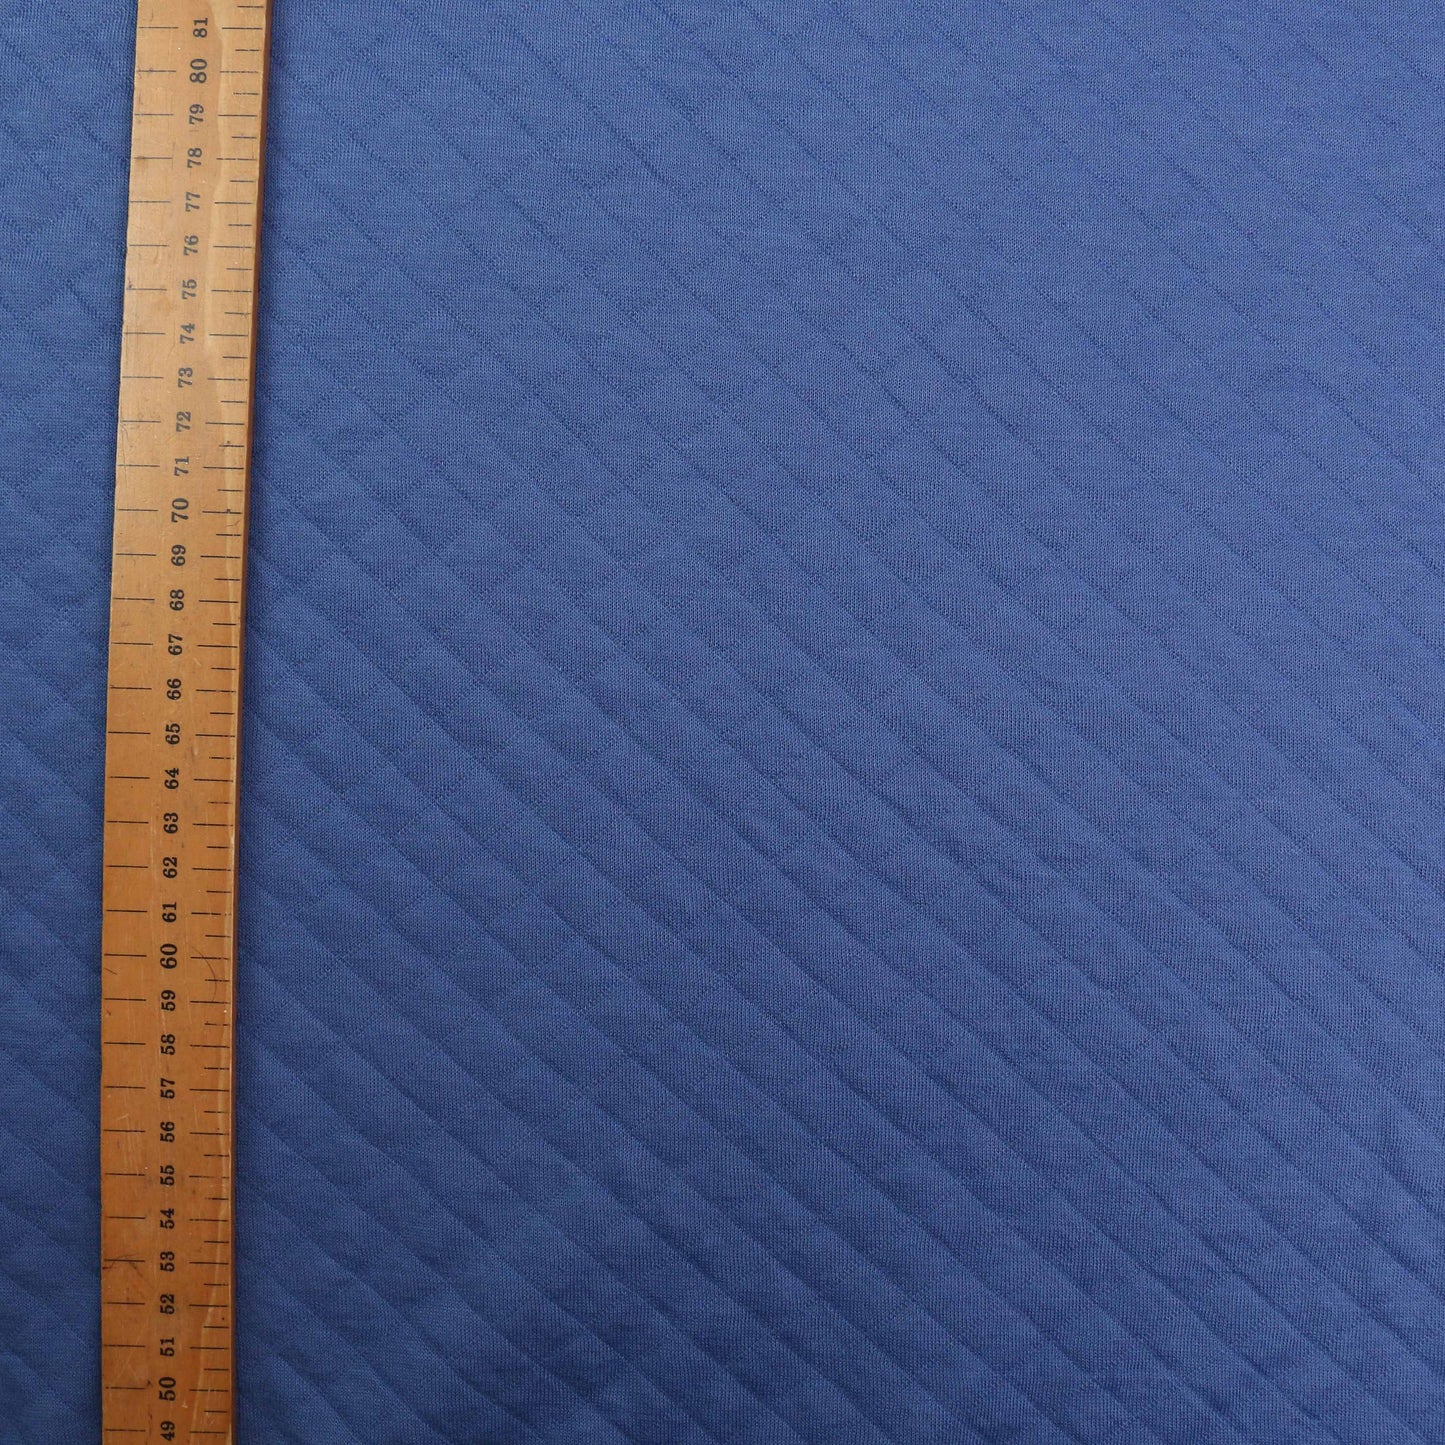 Quilted Jersey Fabric - Blue diamond